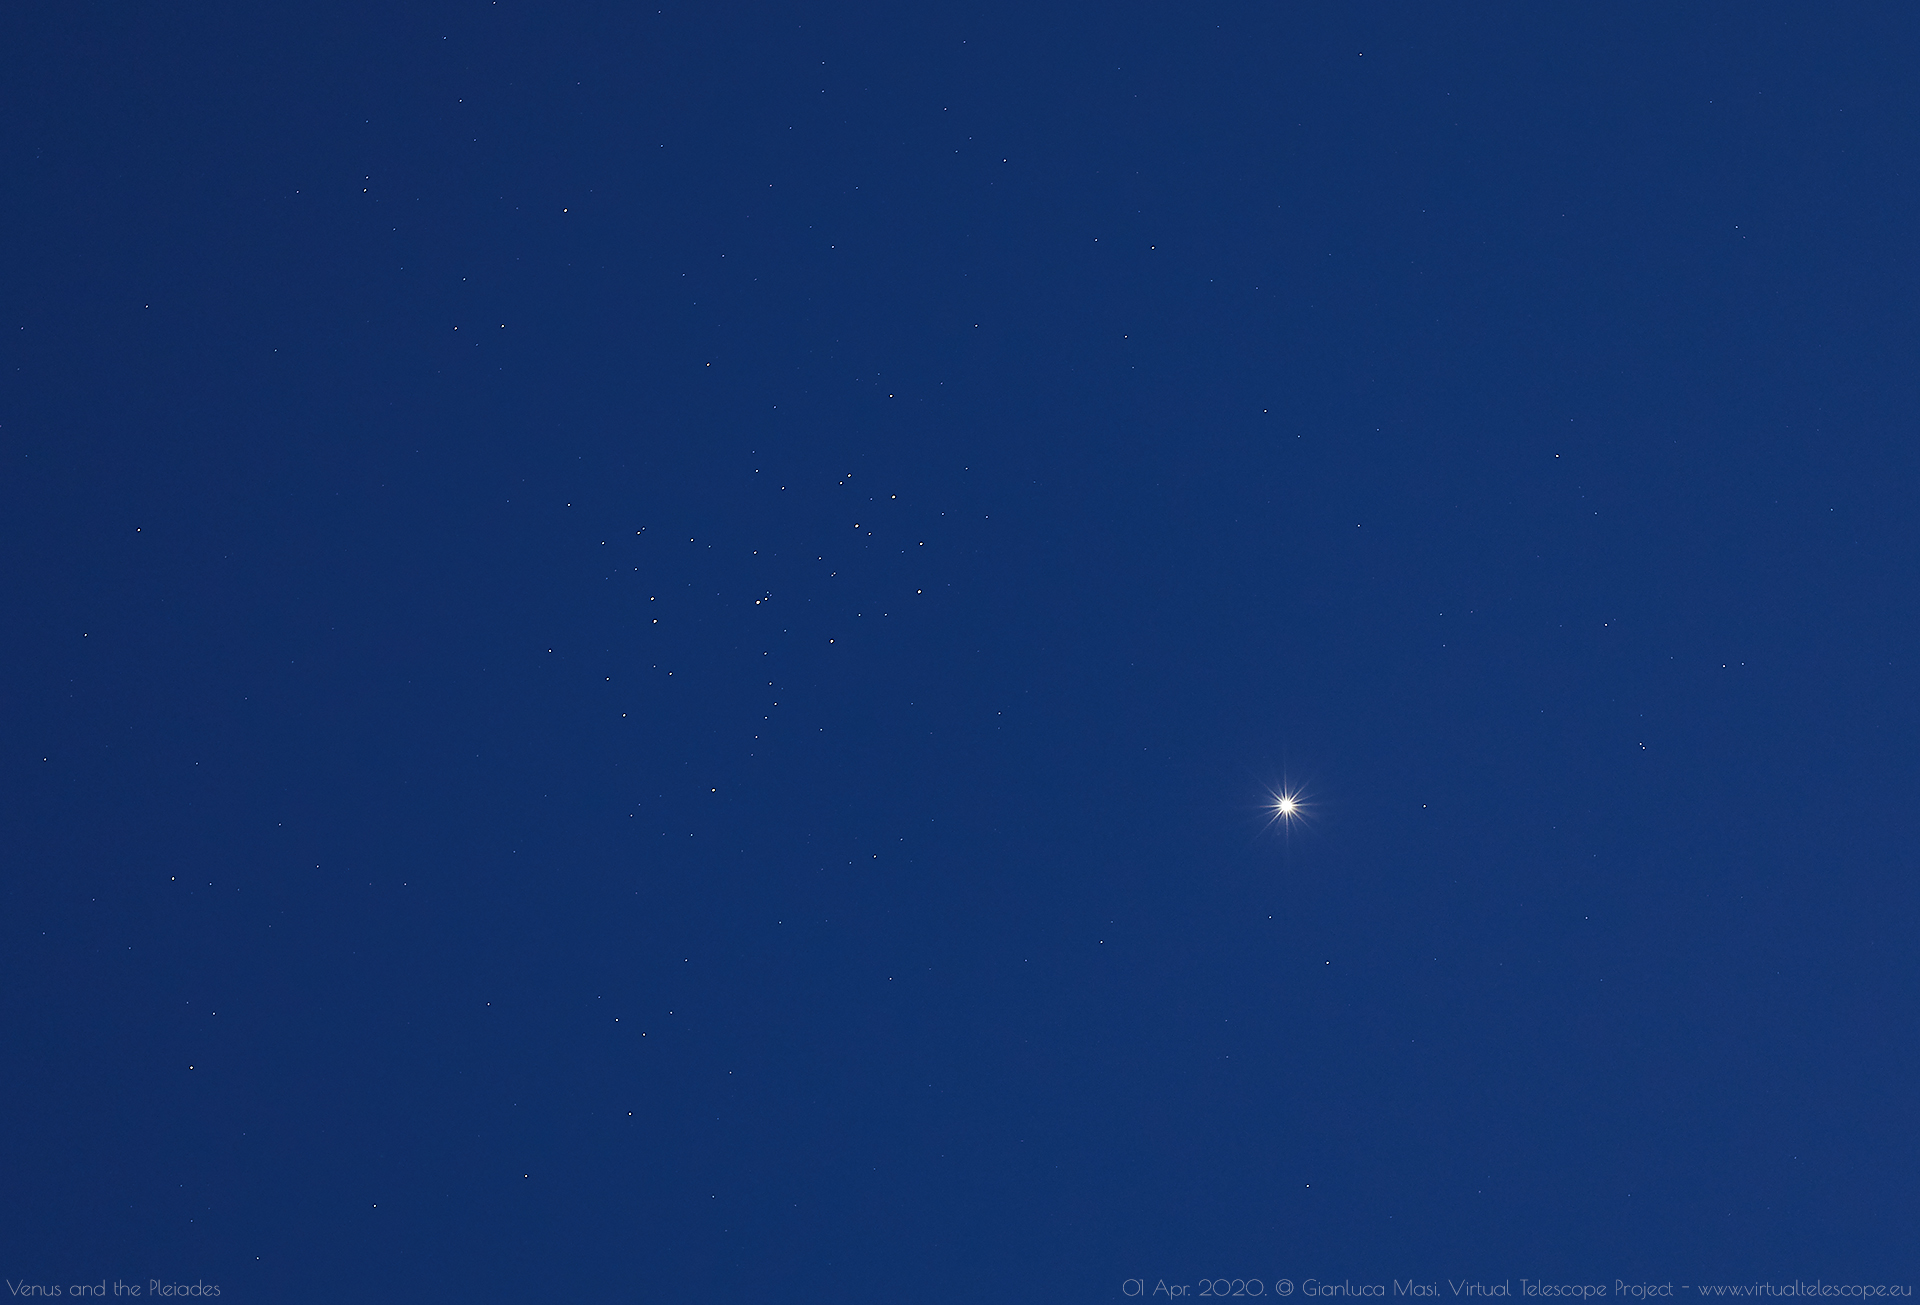 Venus and the Pleiades at dusk, while the sky was still a bit clear. 1 Apr. 2020